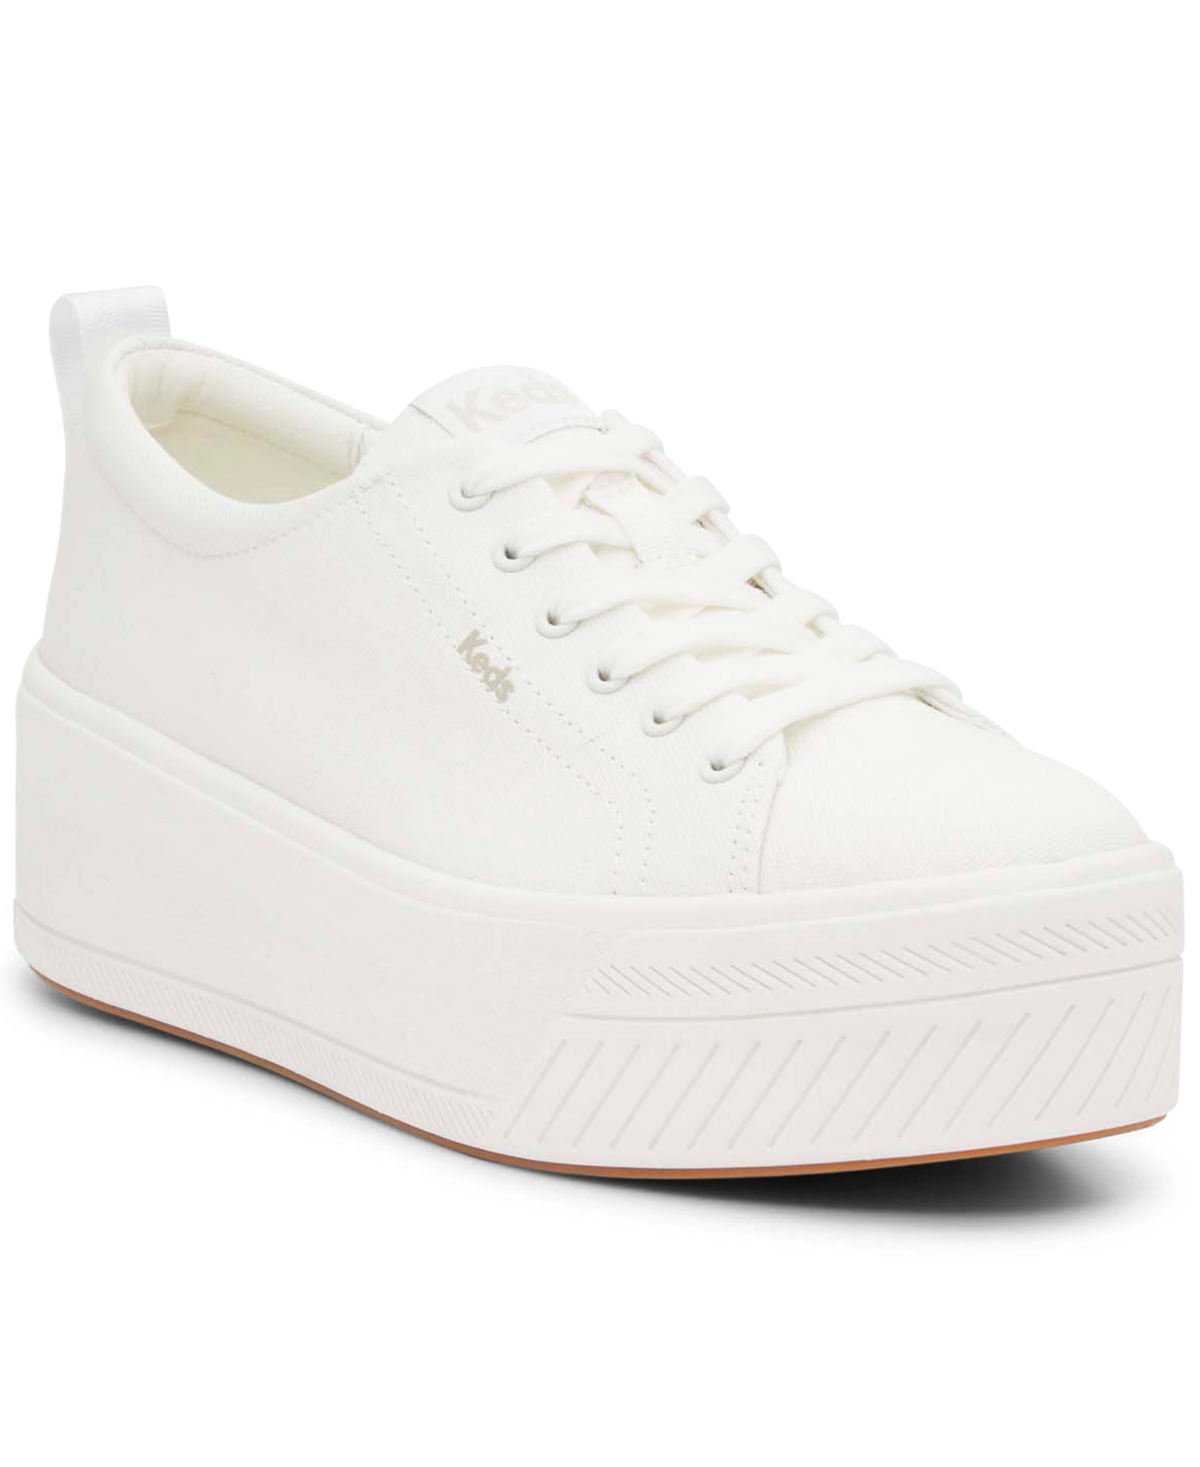 Women's Skyler Canvas Lace-Up Platform Casual Sneakers from Finish Line - White